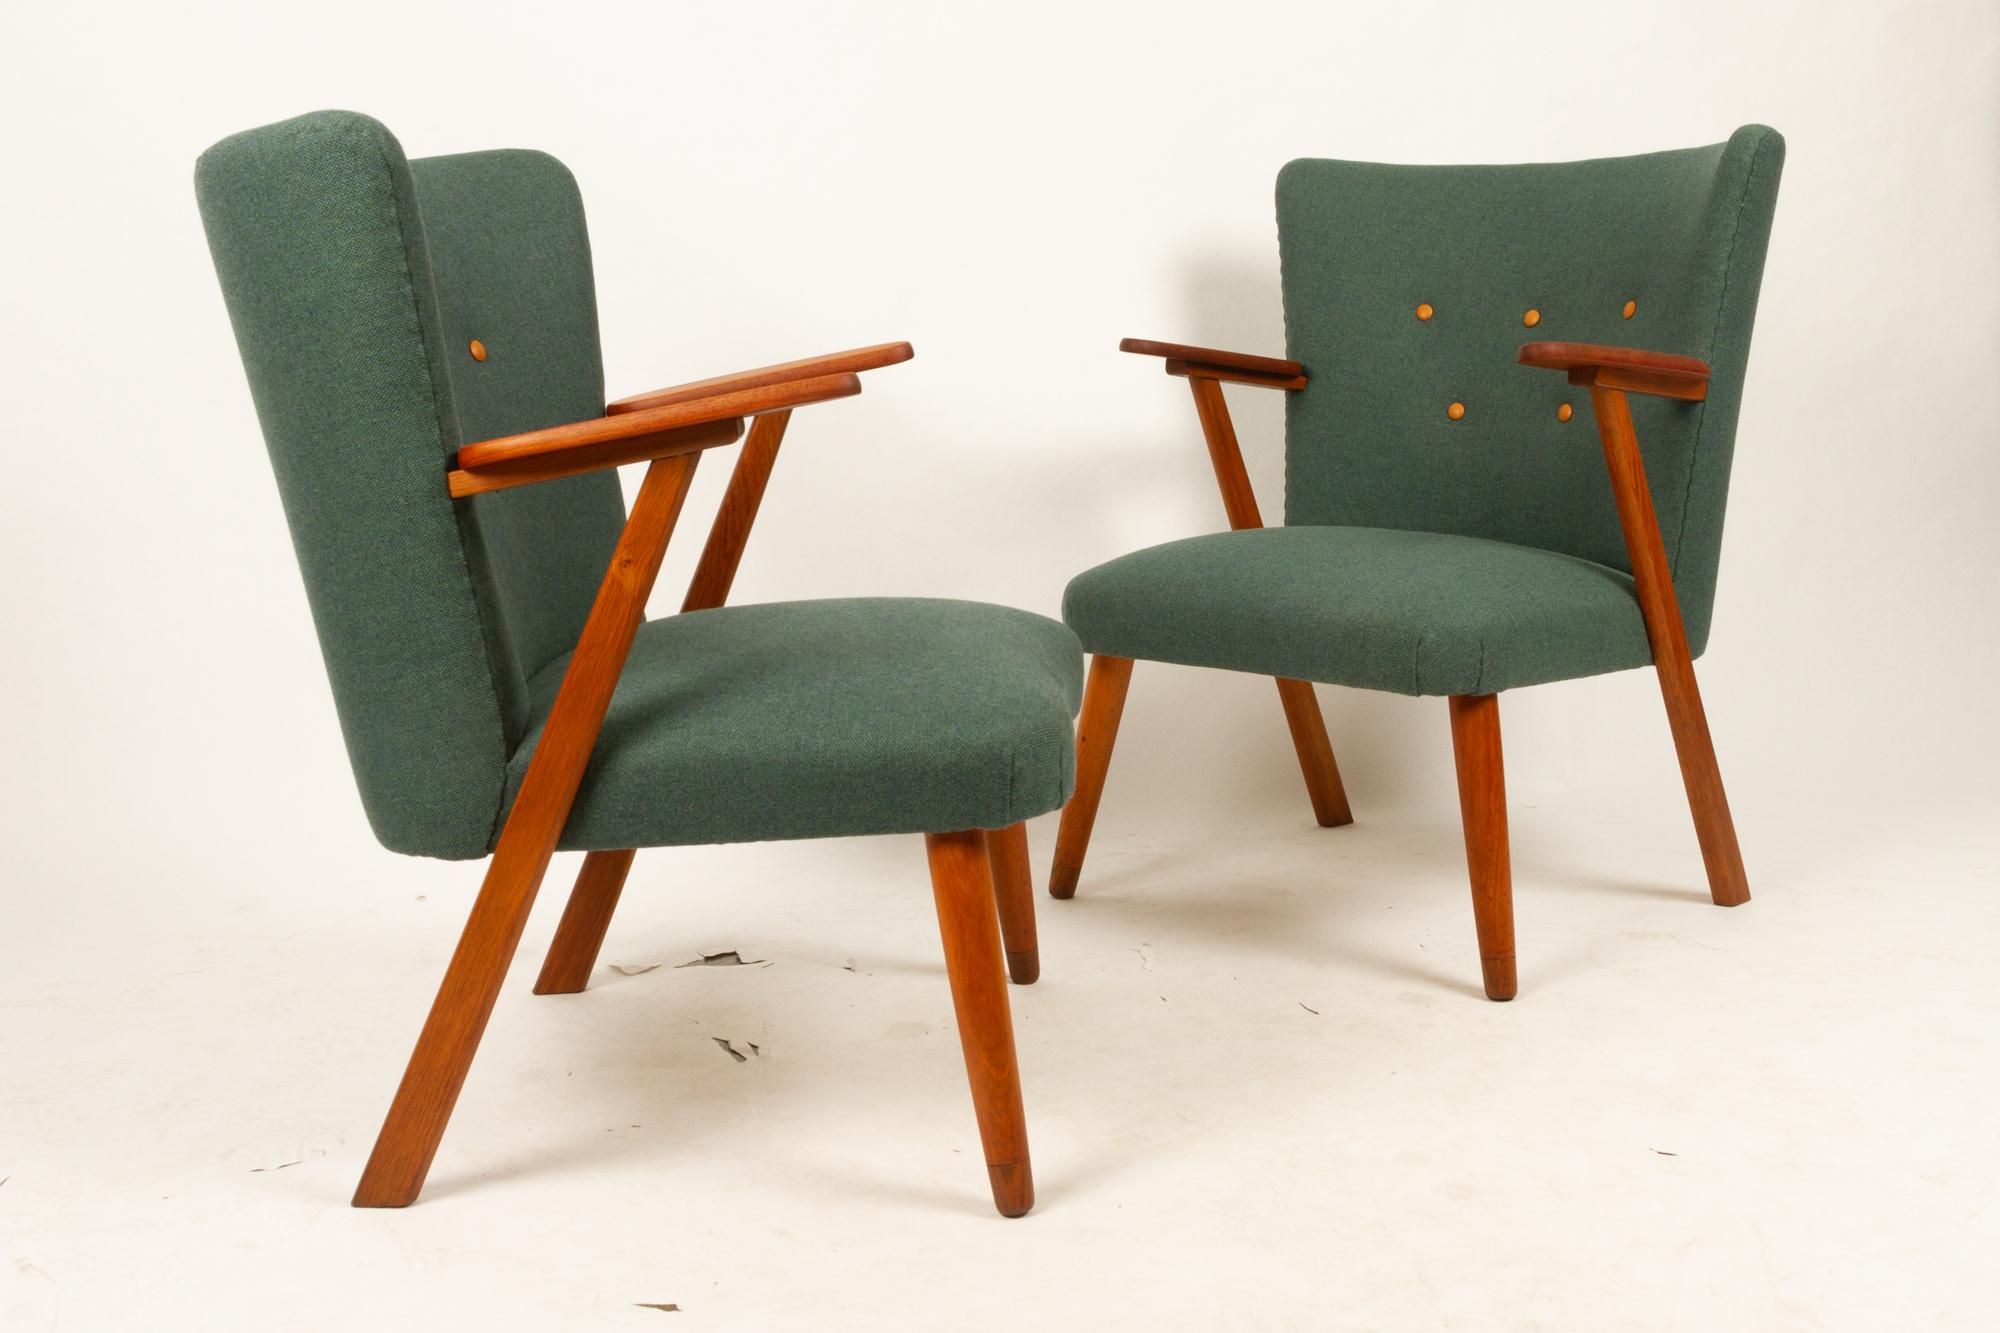 Danish pair of vintage lounge chairs 1960s
Pair of stylish Mid-Century Modern cocktail chairs. Wide curved back, Z-shaped frame and round tapered front legs. Frame in oak, armrests in solid teak. Professionally reupholstered with green wool and